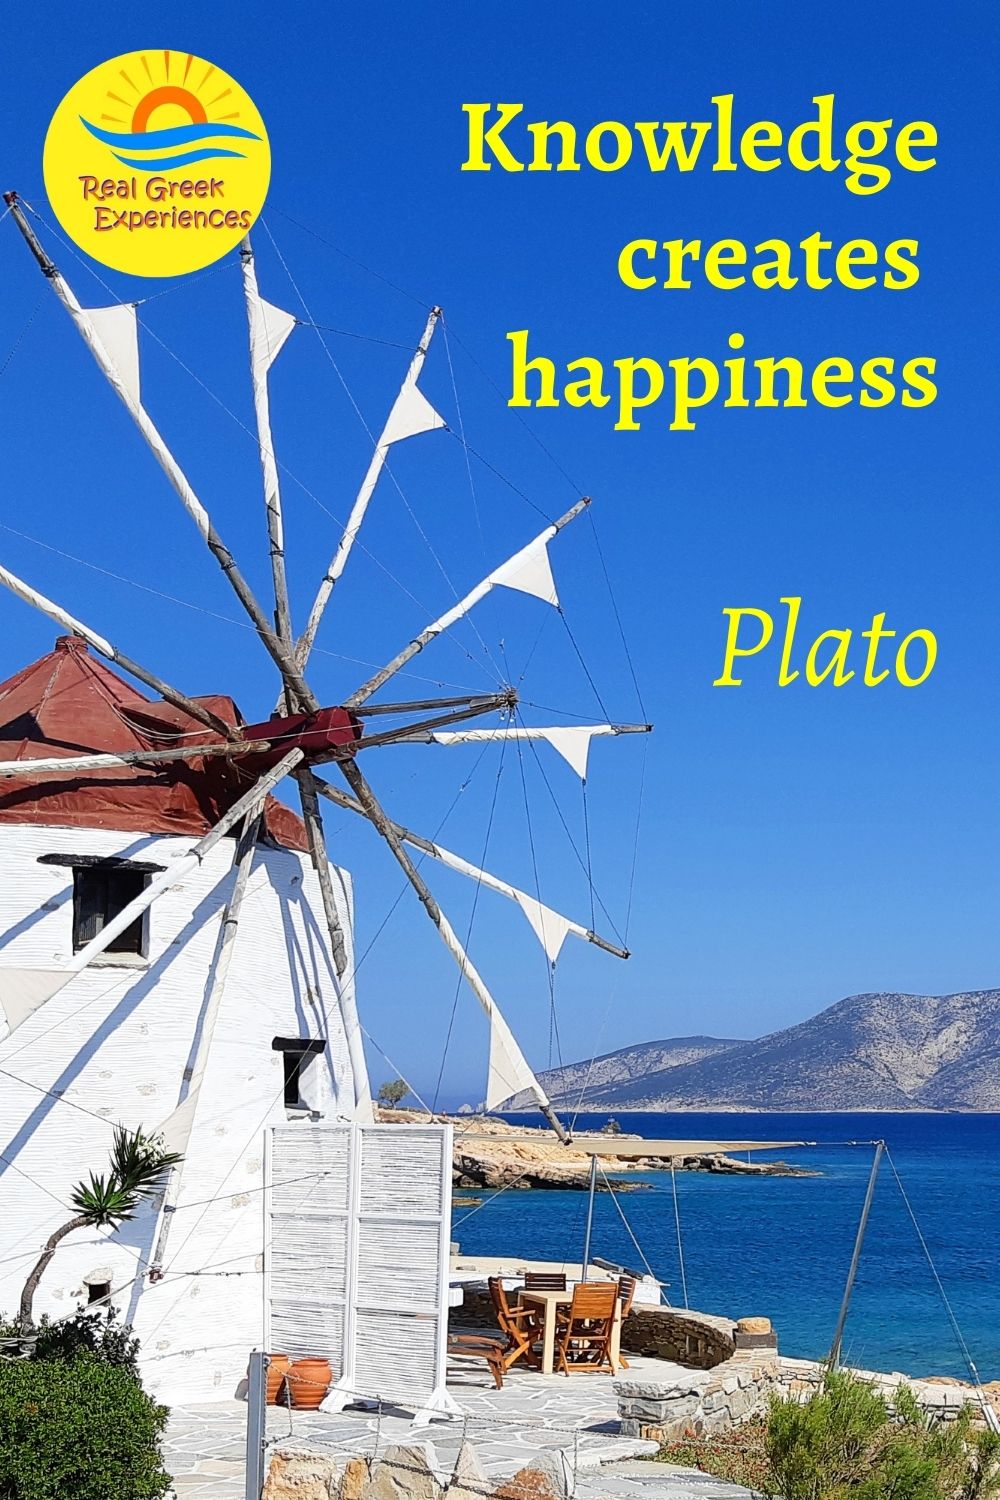 Famous Greece quotes - Knowledge creates happiness - Plato